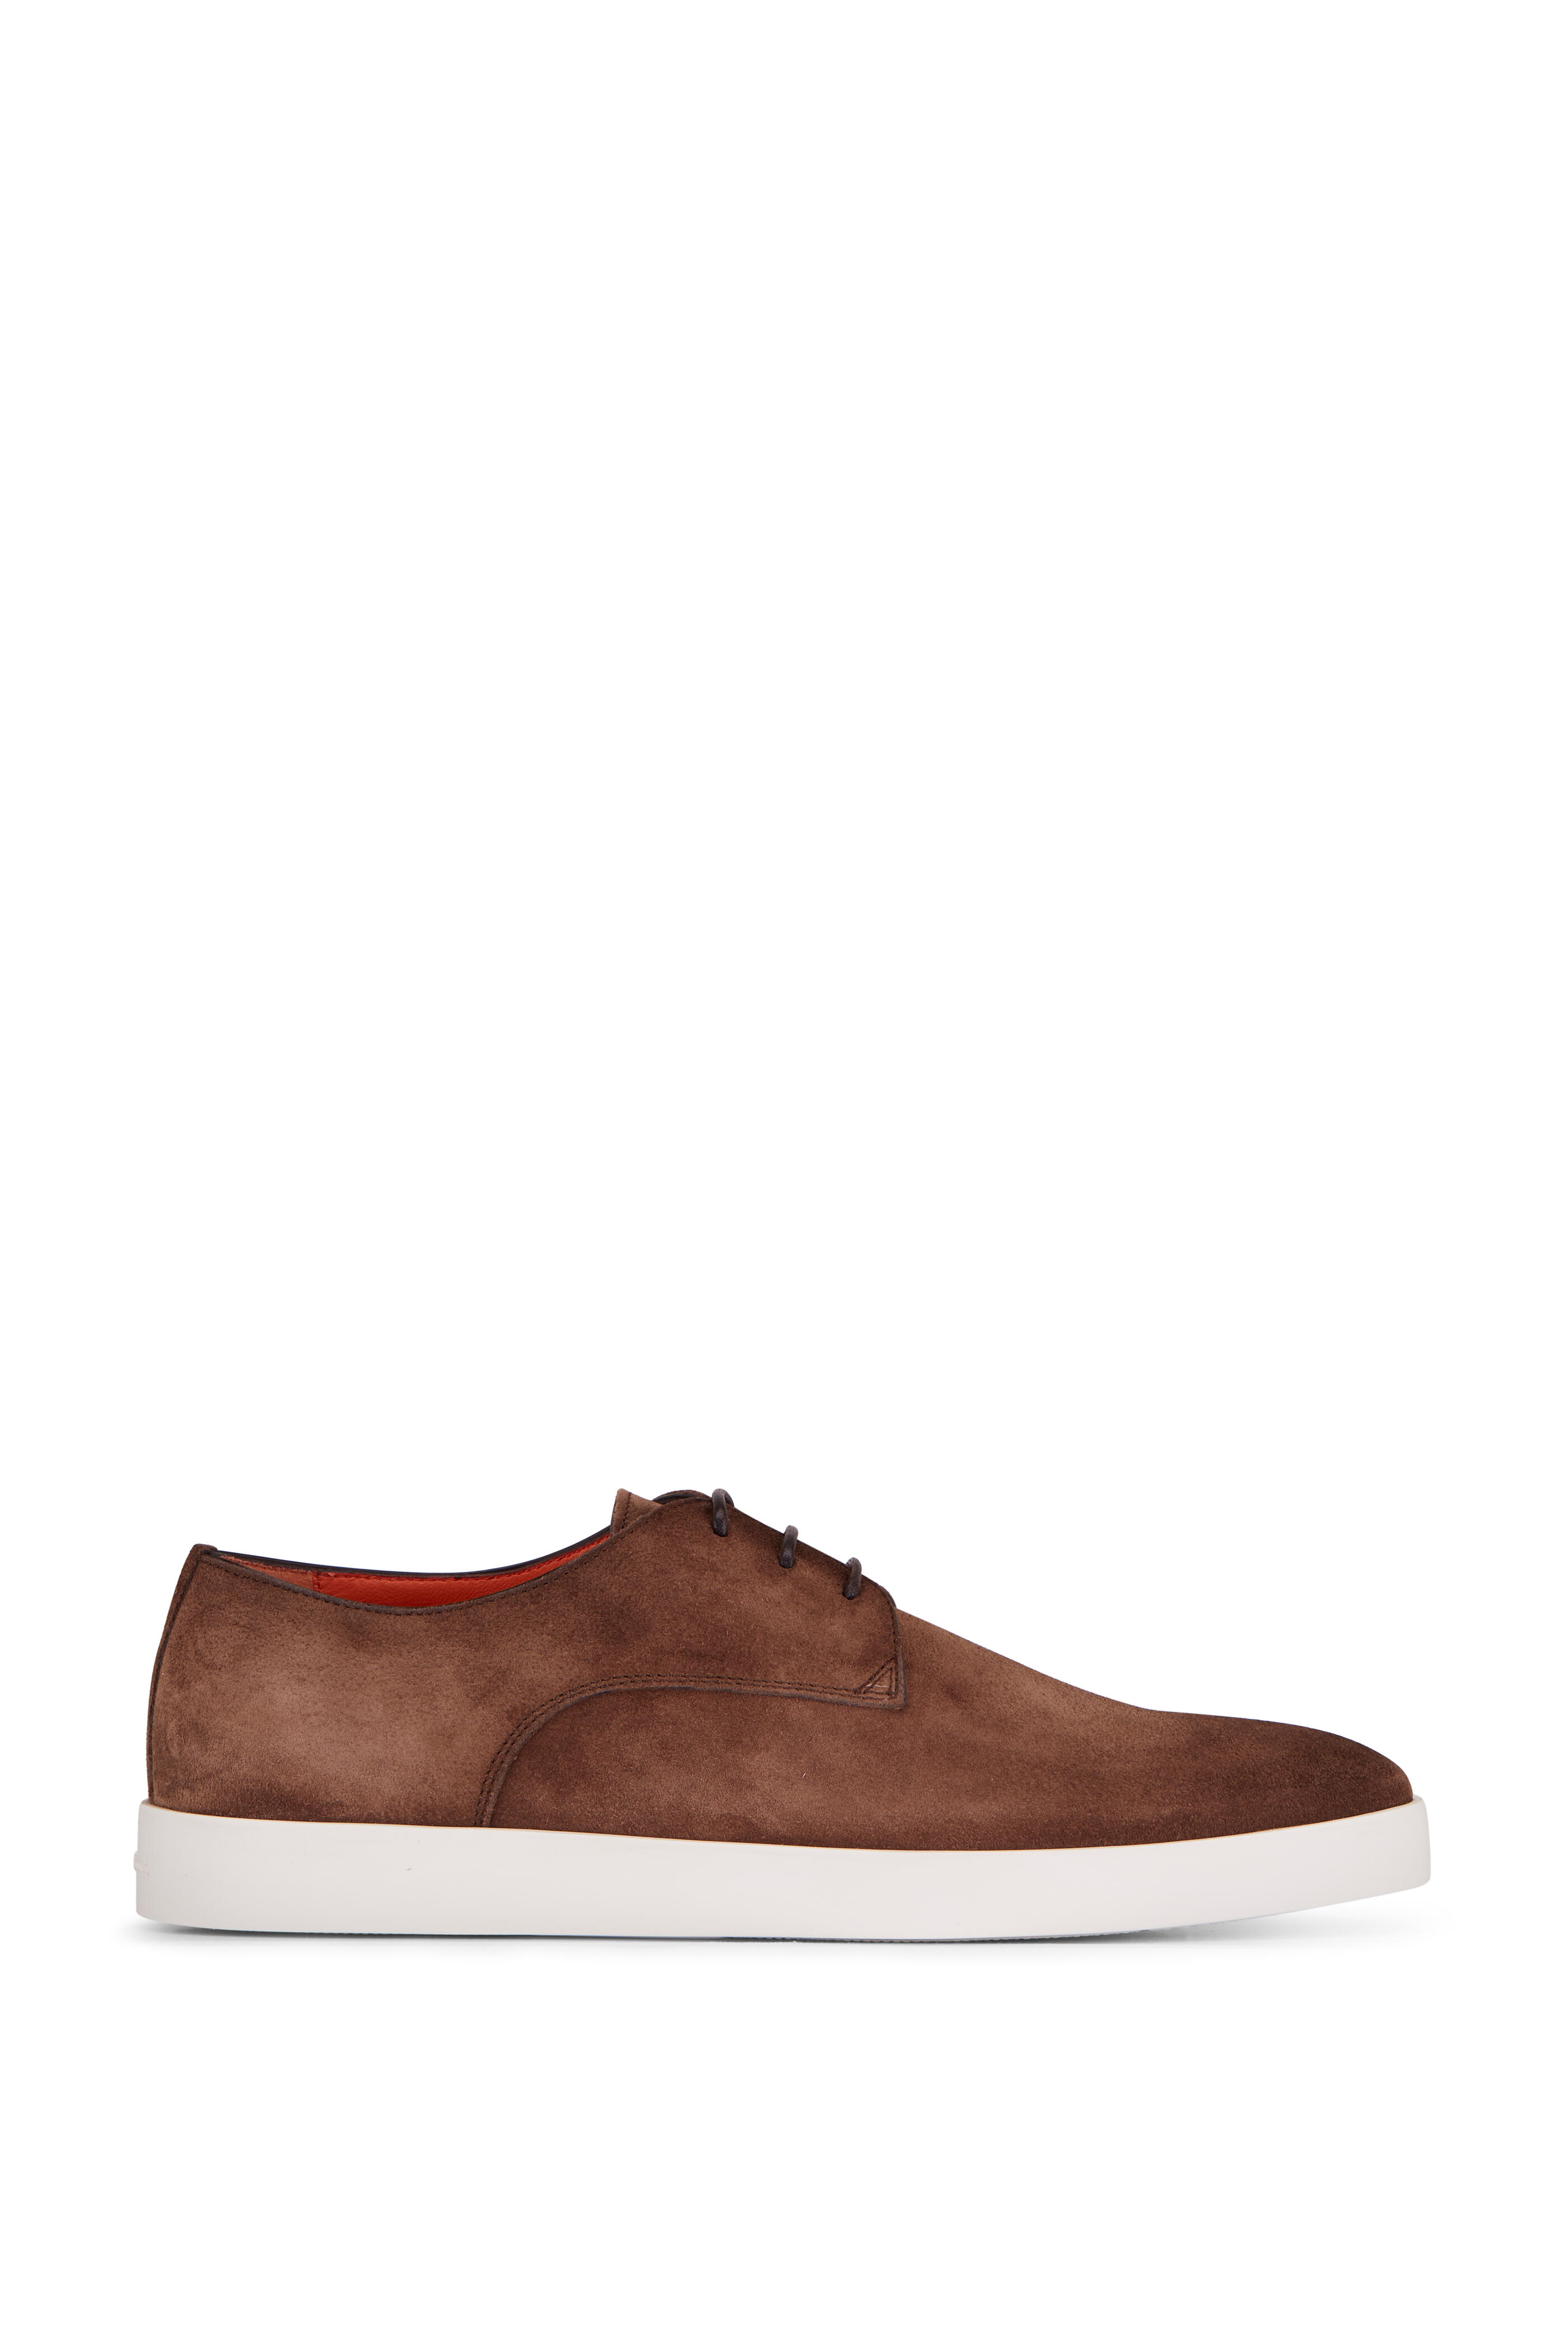 Santoni - Dilate Brown Suede Lace Up Dress Shoe | Mitchell Stores